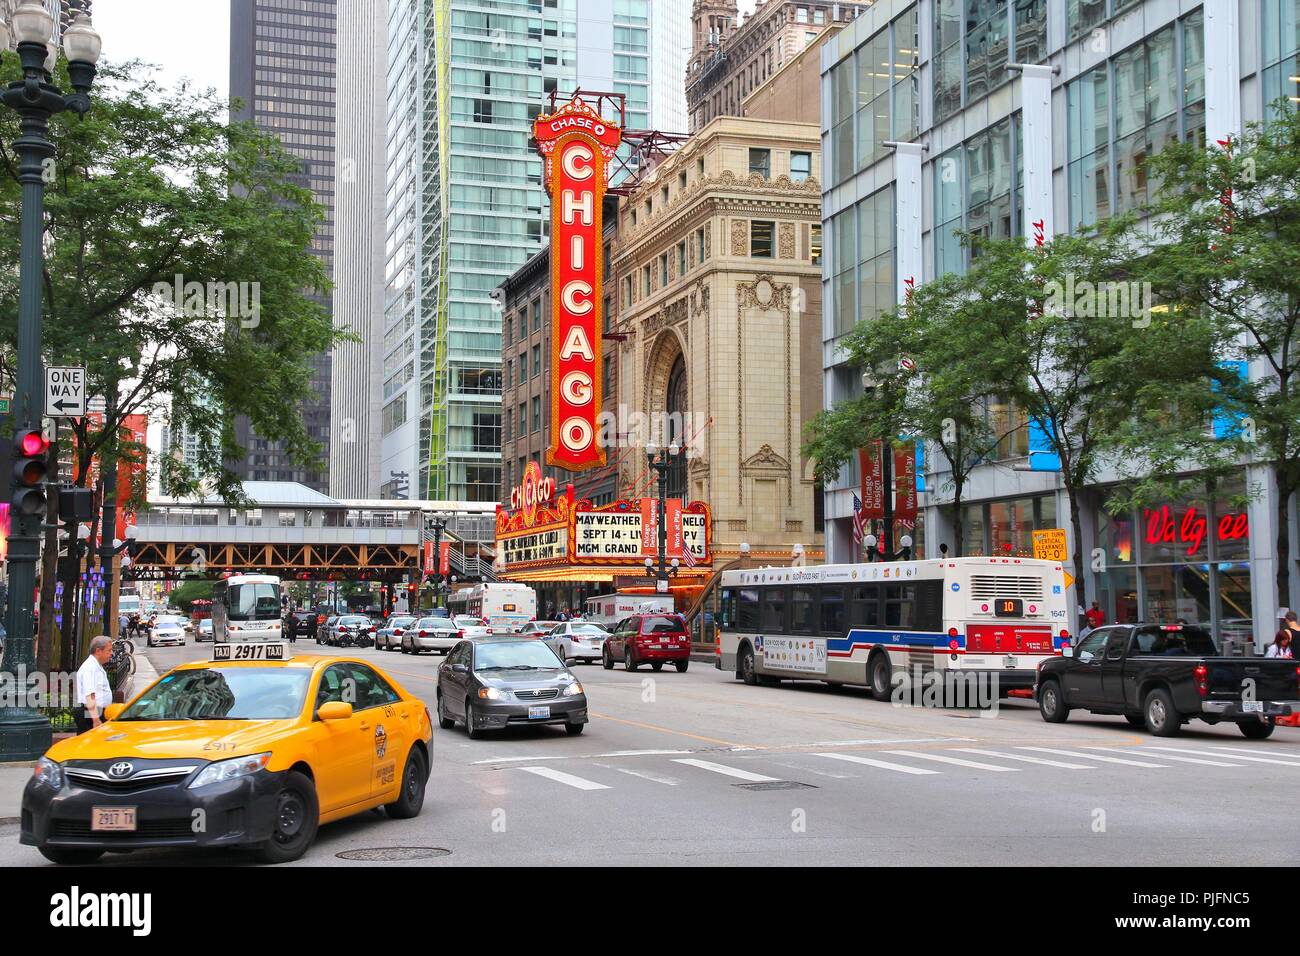 CHICAGO, USA - JUNE 26, 2013: People walk past Chicago Theatre in Chicago. Chicago Theatre was founded in 1921 and is a registered Chicago Landmark. Stock Photo